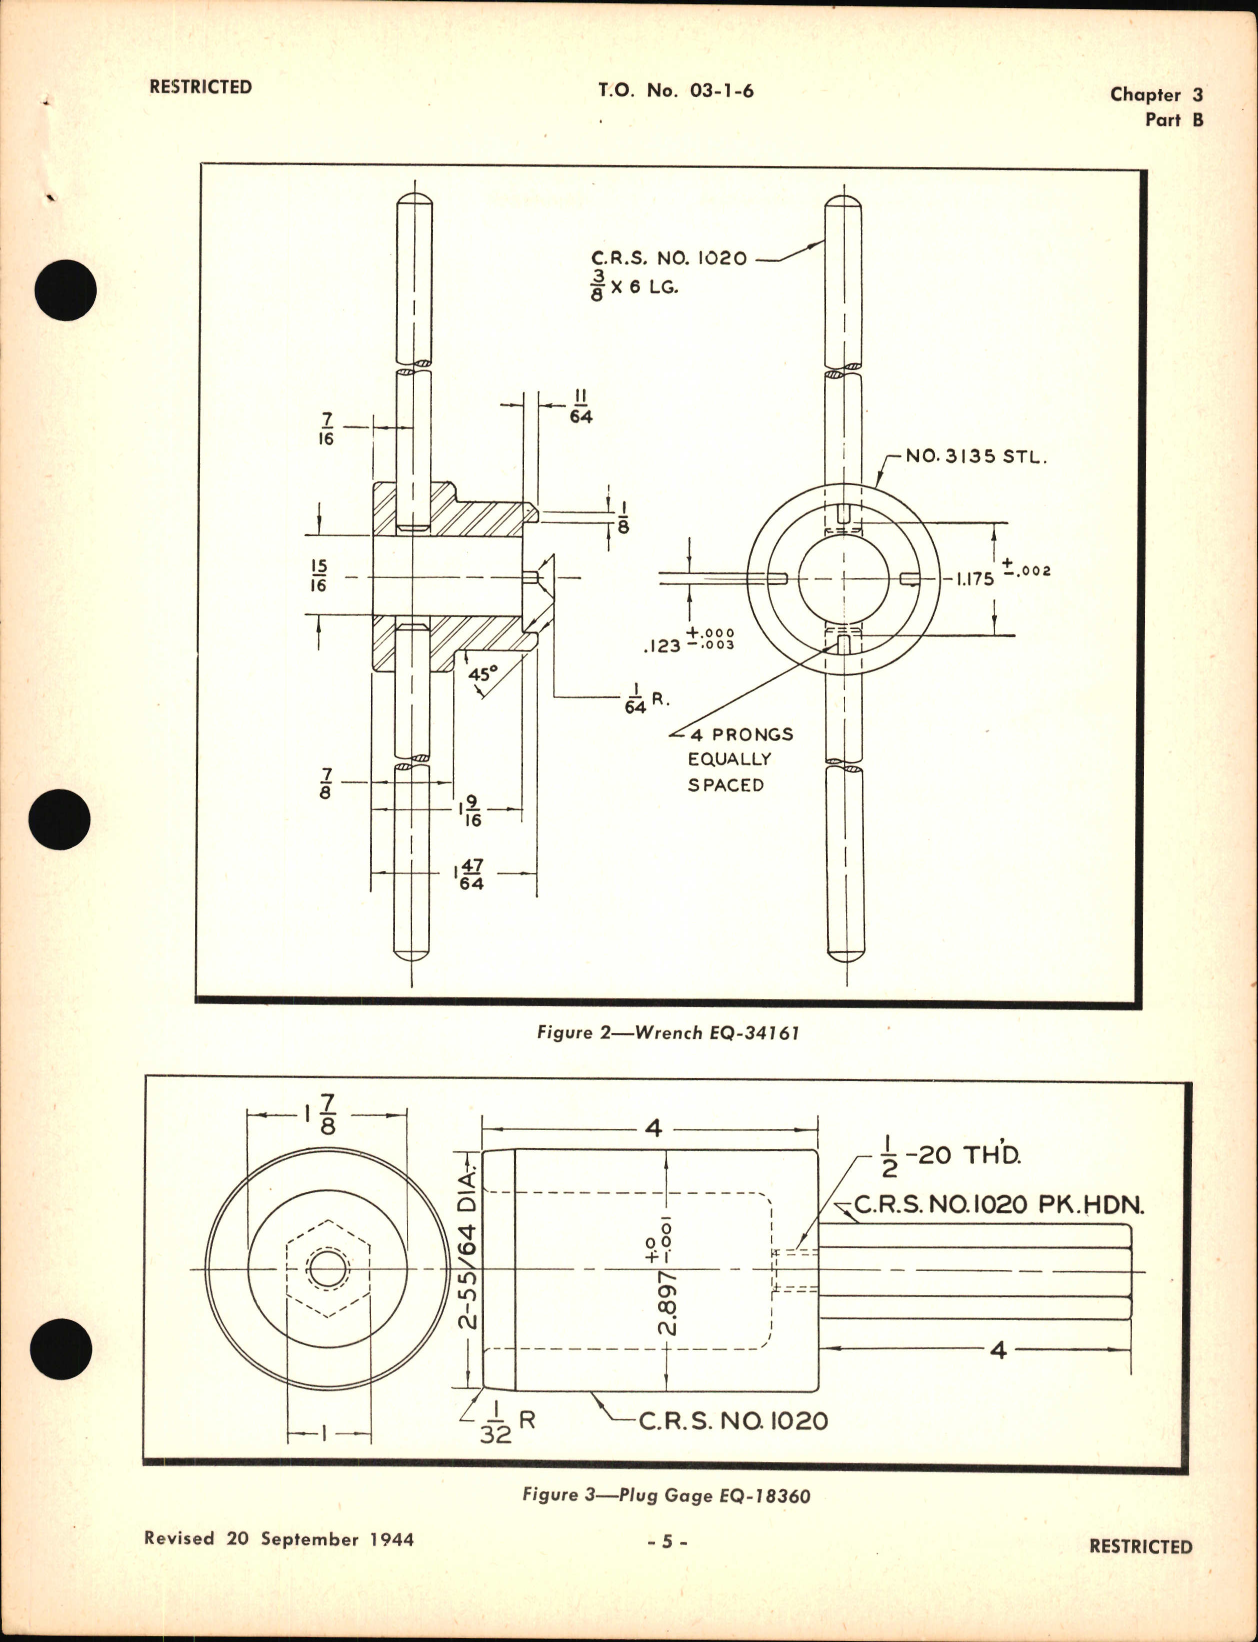 Sample page 5 from AirCorps Library document: Overhaul Instructions for Engine Driven Single Voltage D-C Generator